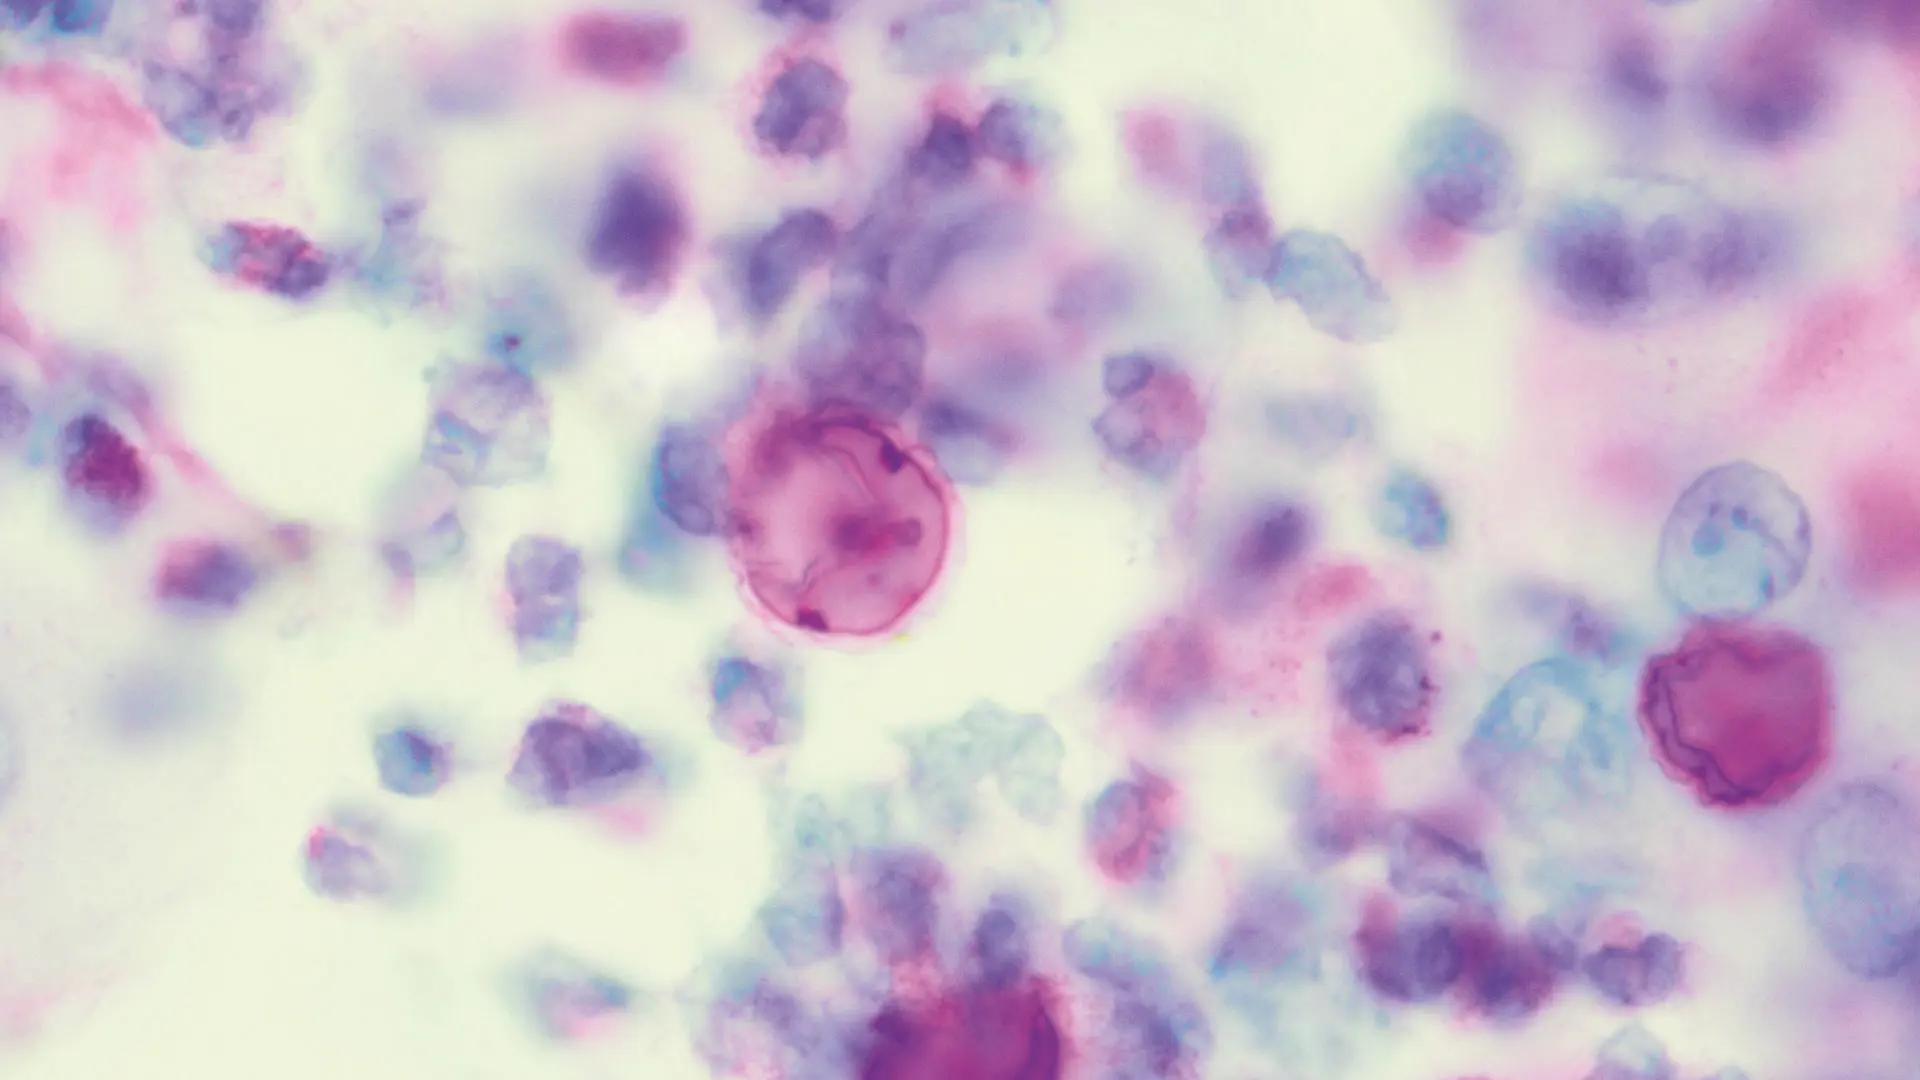 Oil immersion optic microscopy with Periodic Acid Schiff staining shows an unstained thick
capsule of Acanthamoeba cyst with internal labeling of cuticle and organelles in the acute inflammatory background (cytology, original magnification 1000x).